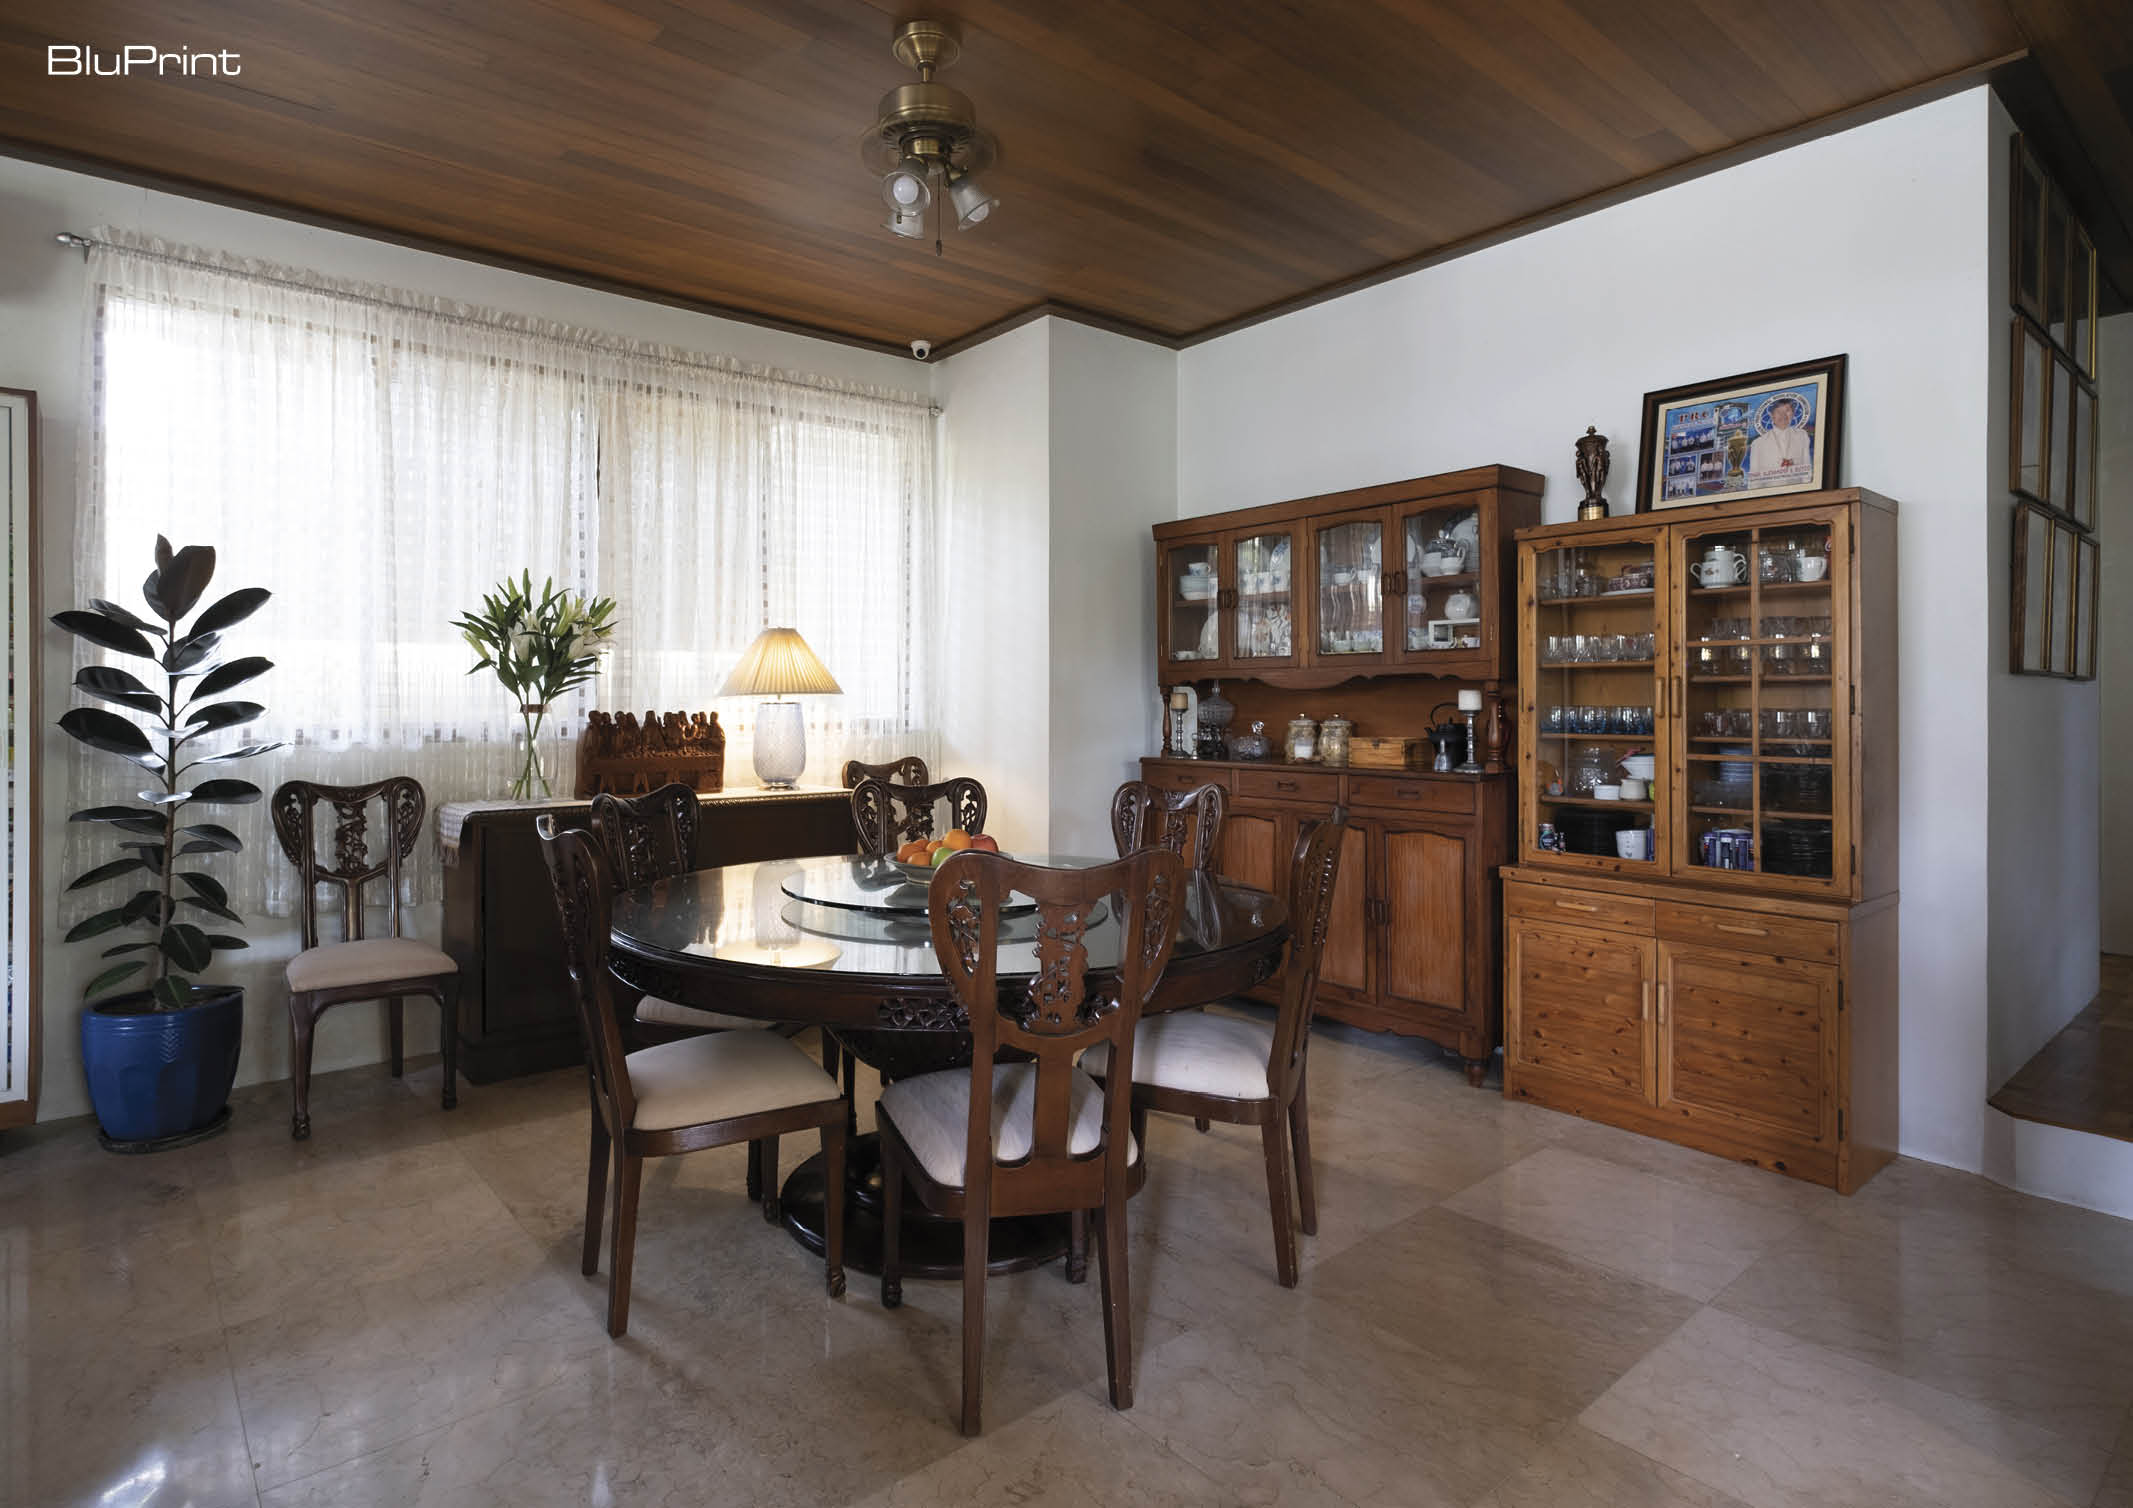 A dining room featuring a round traditional dining table and four chairs in the center, and wooden cabinetry on the far wall